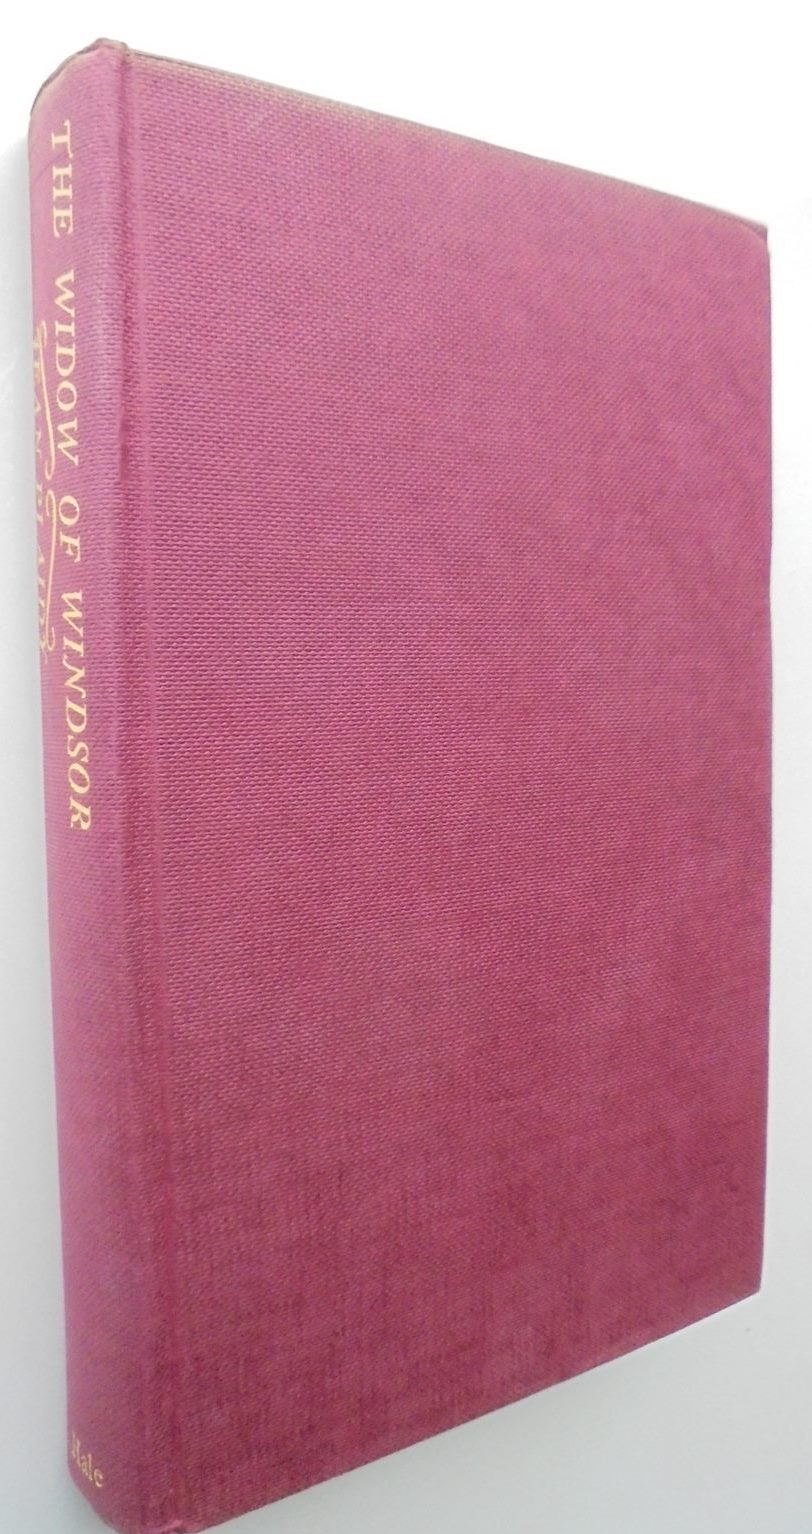 The Widow of Windsor. By Jean Plaidy 1st edition (1974)